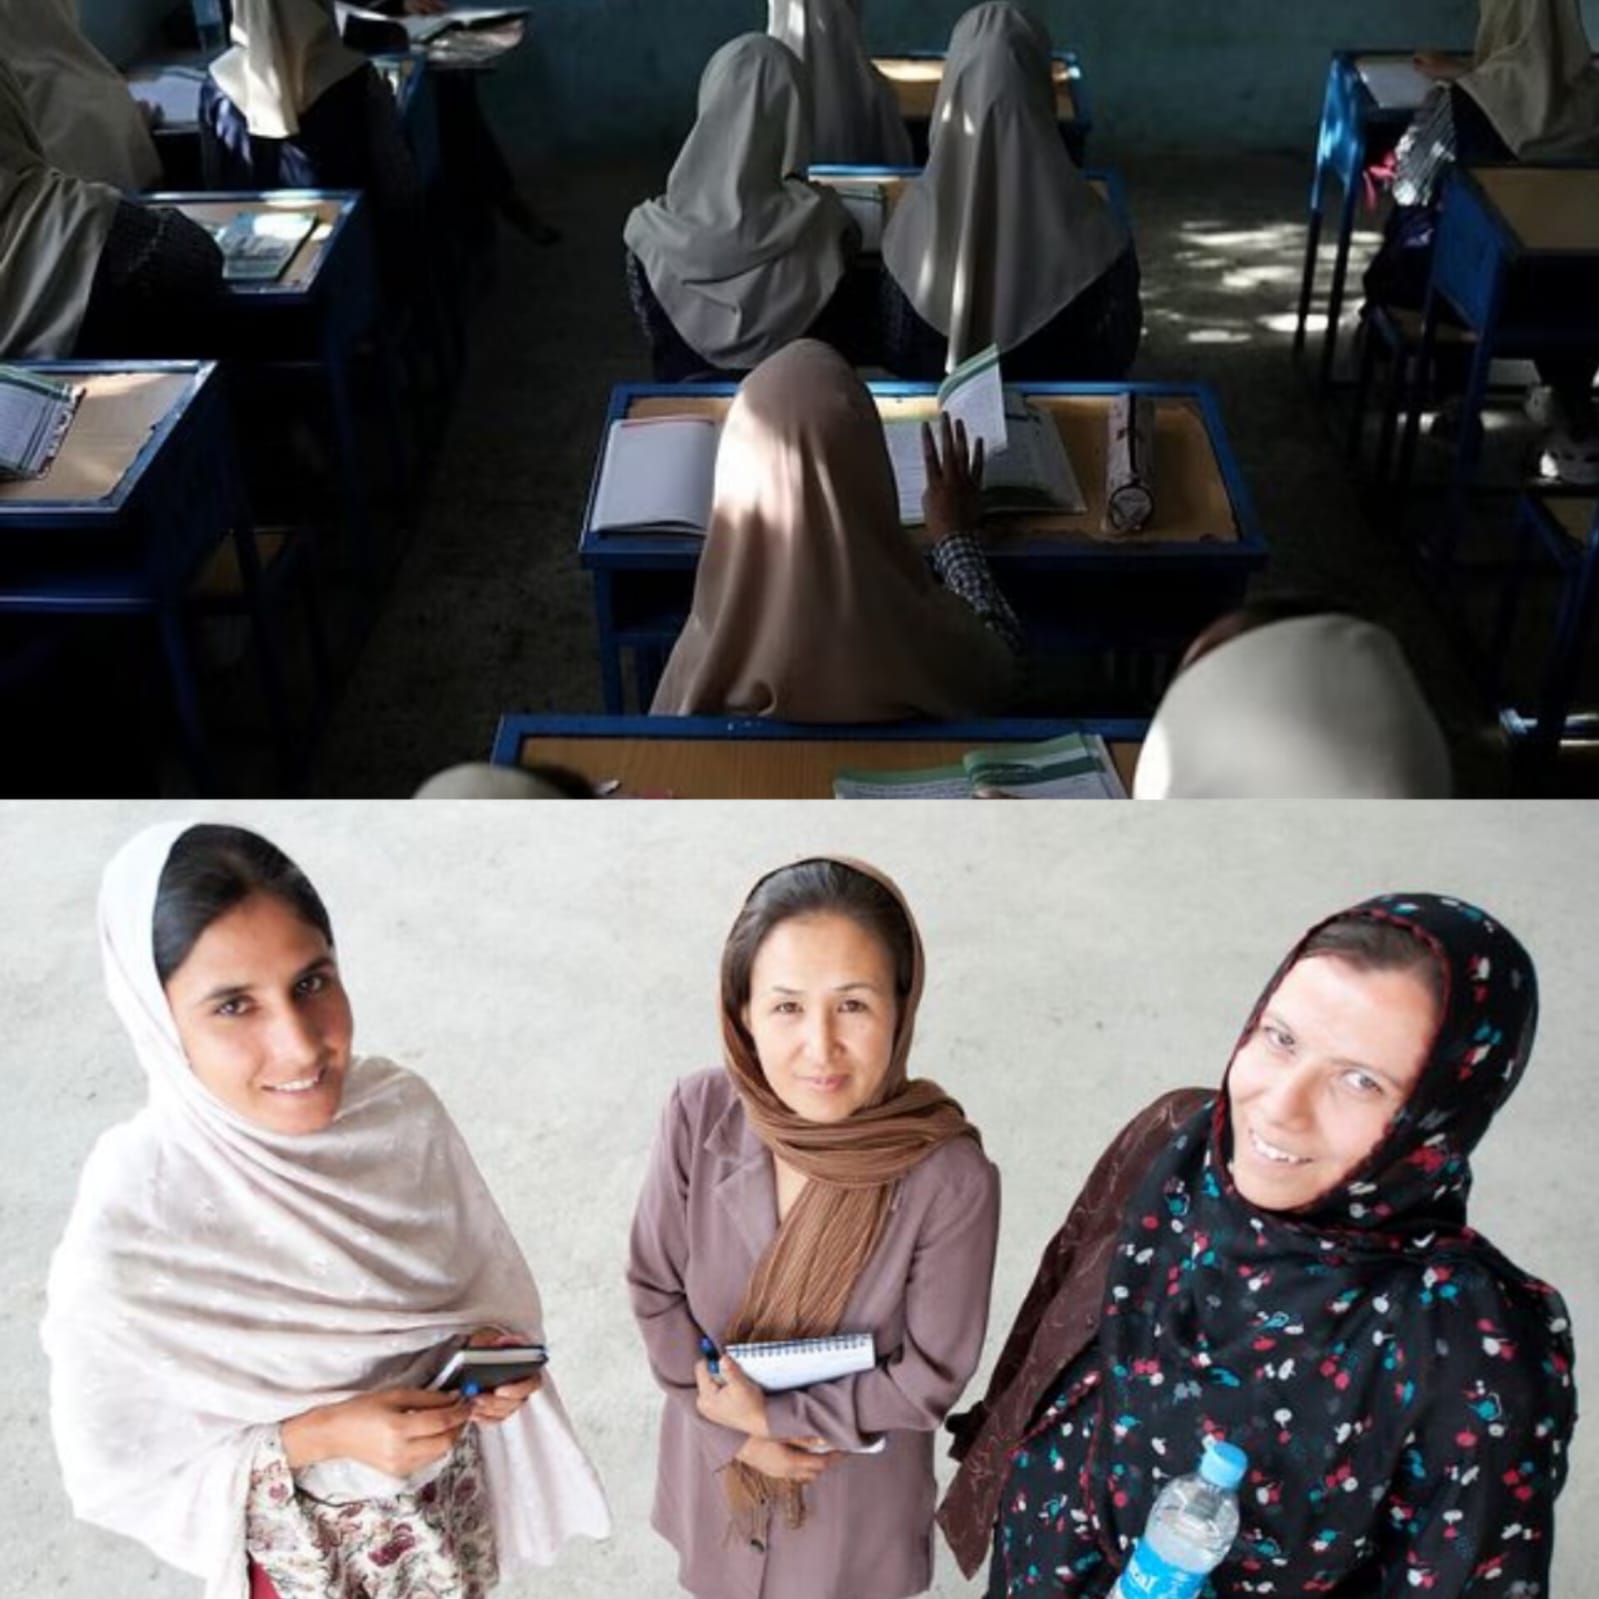 Afghan woman entrepreneur fosters female empowerment and job possibilities